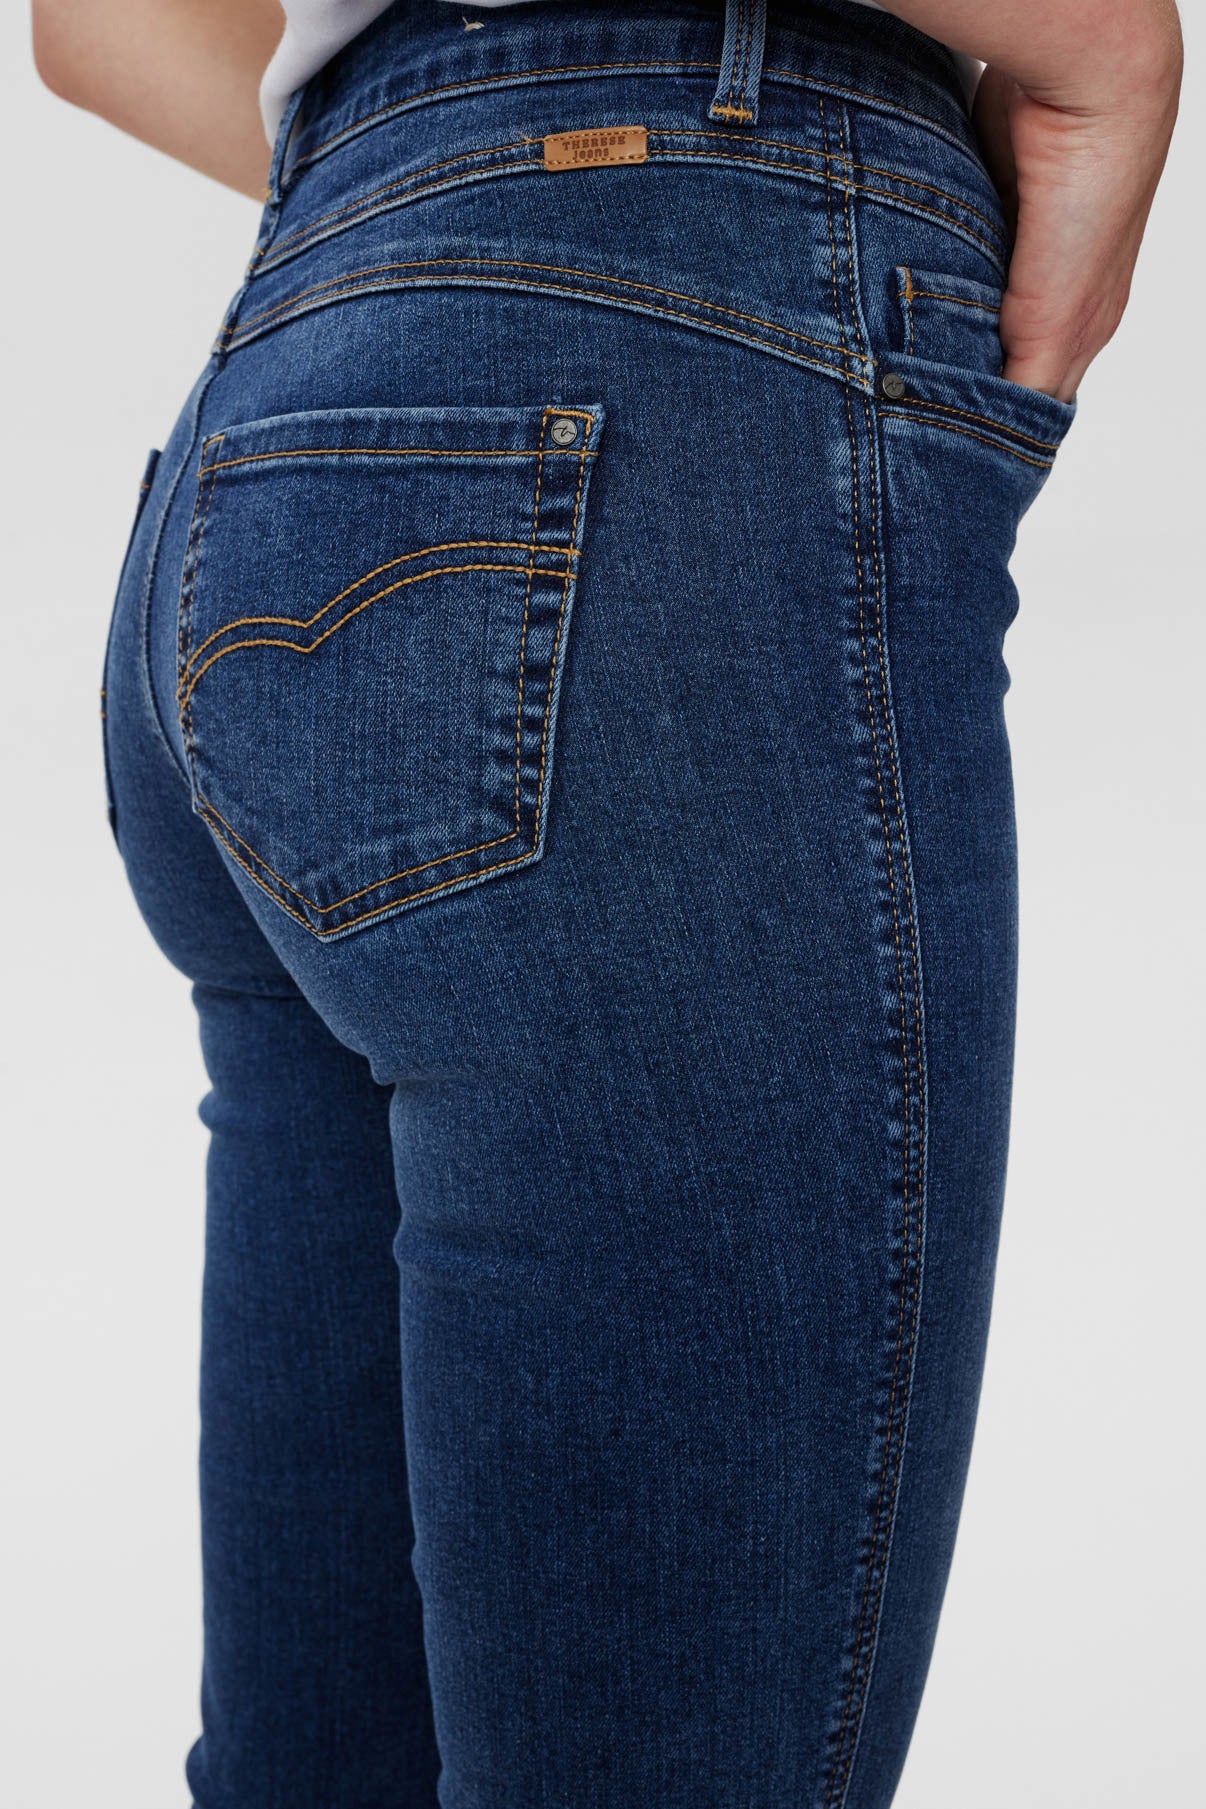 THERESE Jeans Maryann 7737